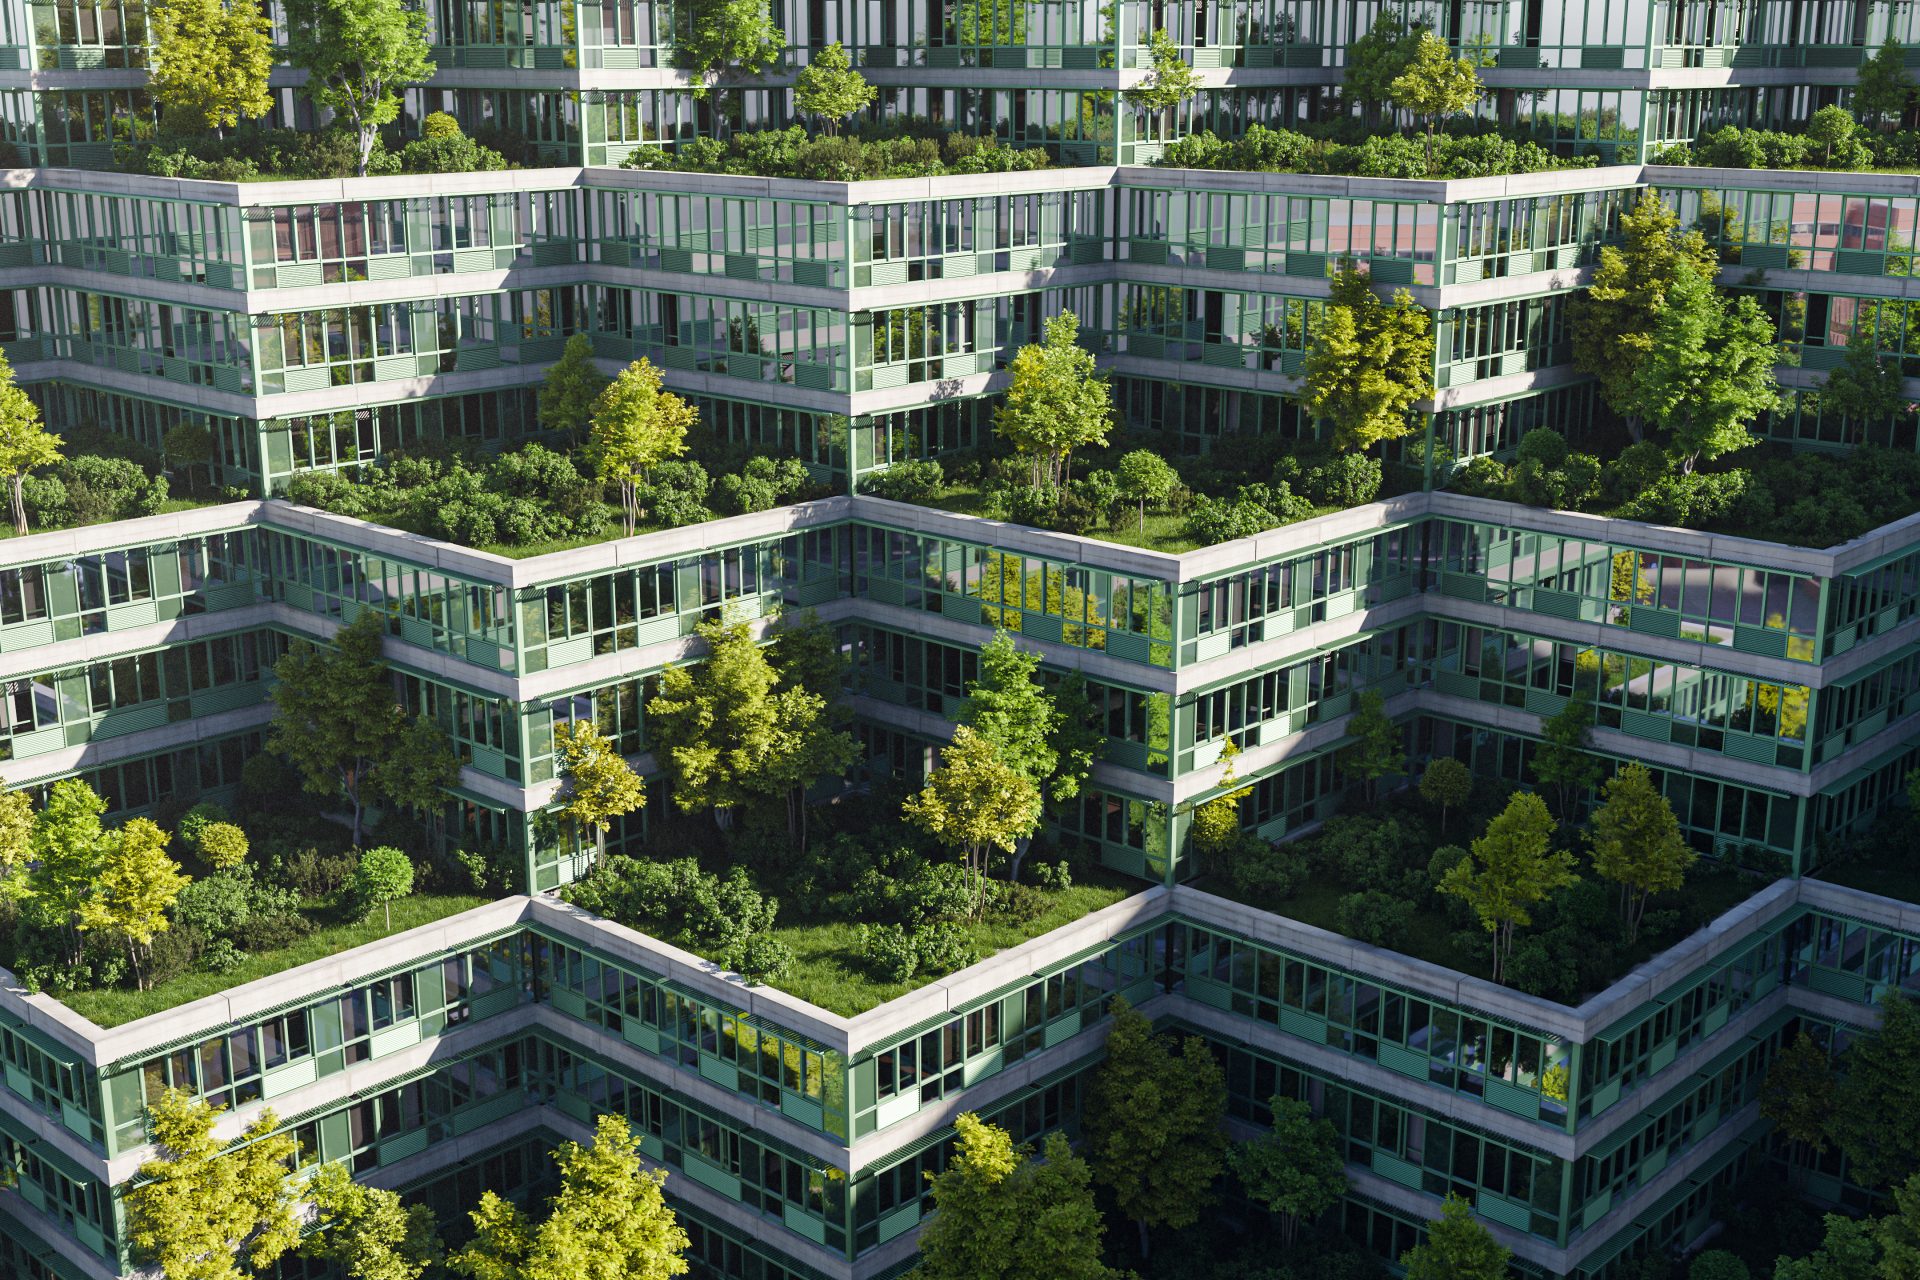 Biophilic design: Pictures of green architecture for your soul